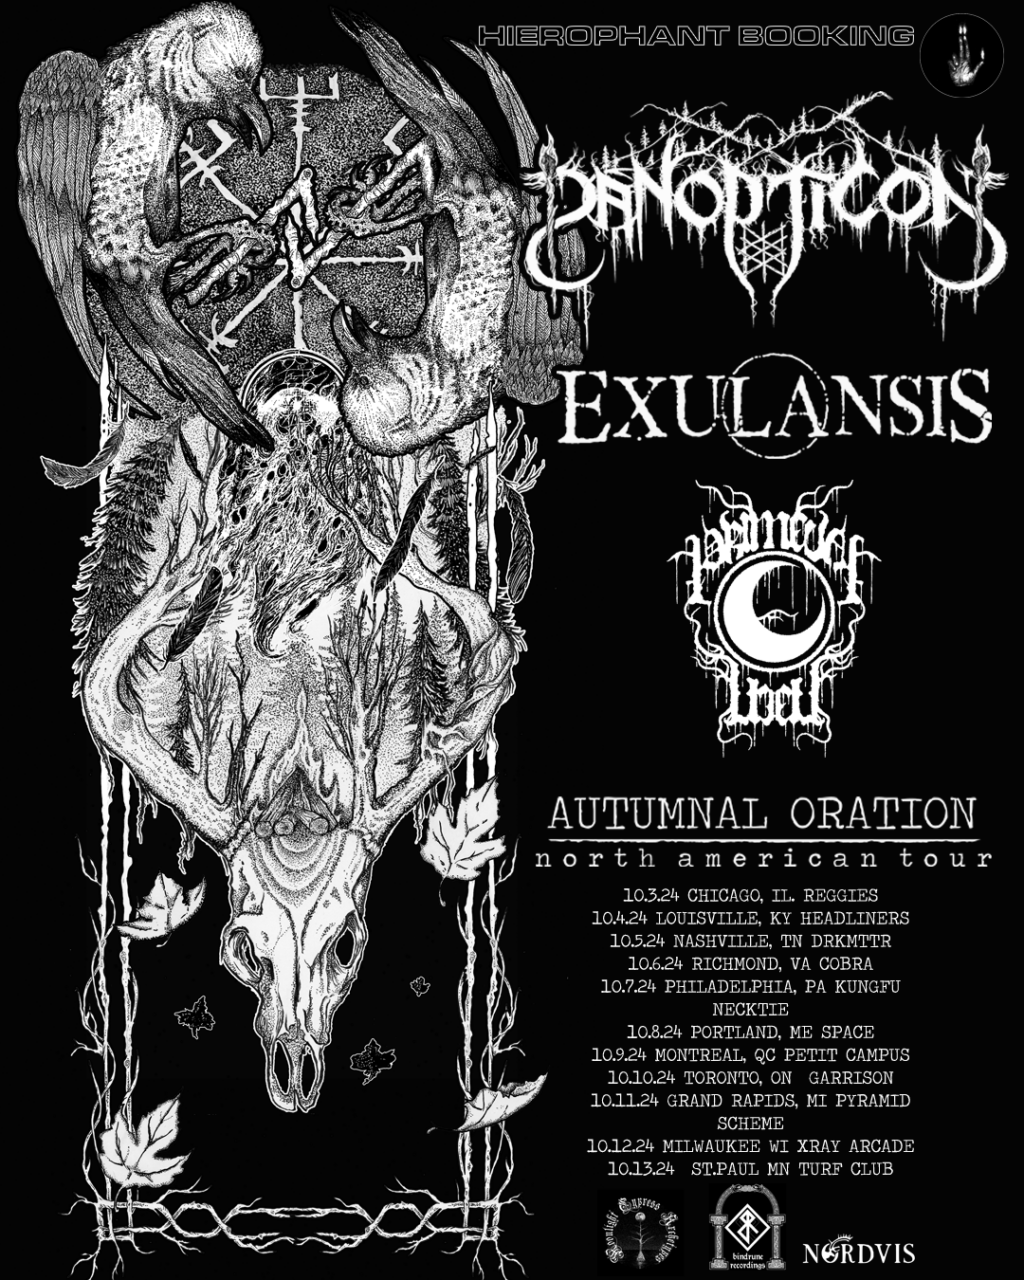 Tour poster for Panopticon's October tour with Exulansis and Primeval Well.